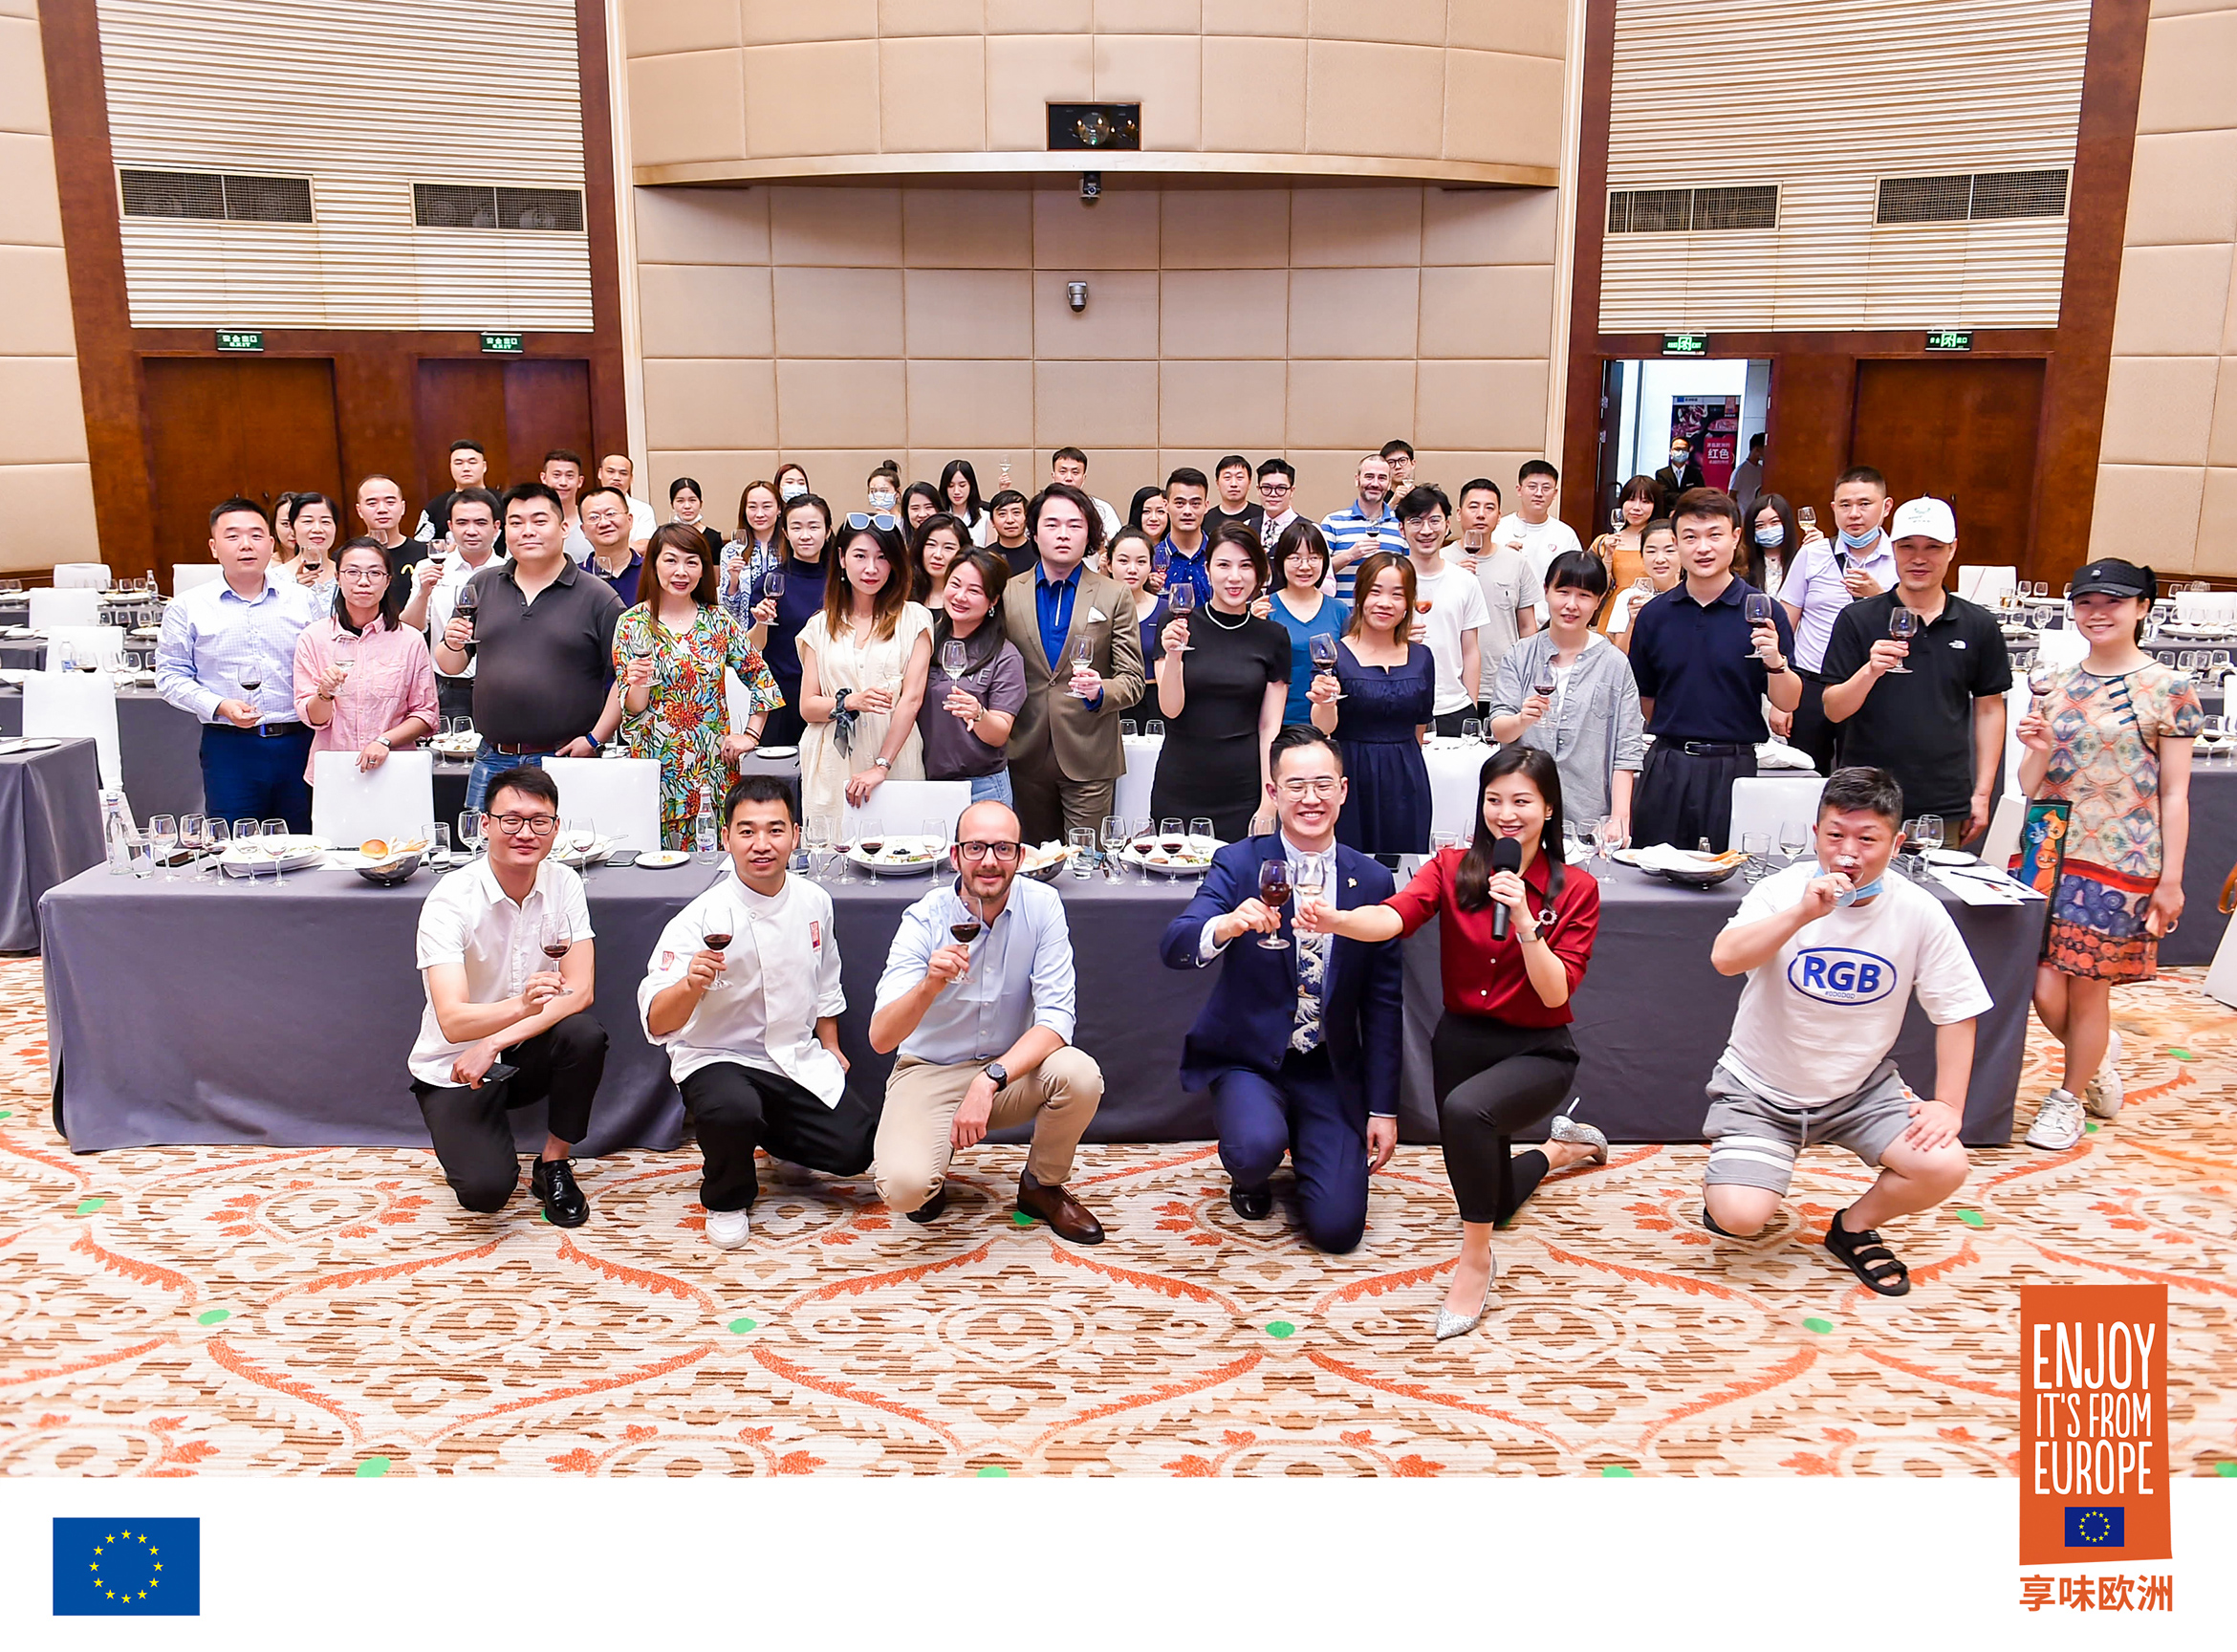 Family picture with participants of Wuhan Tasting.